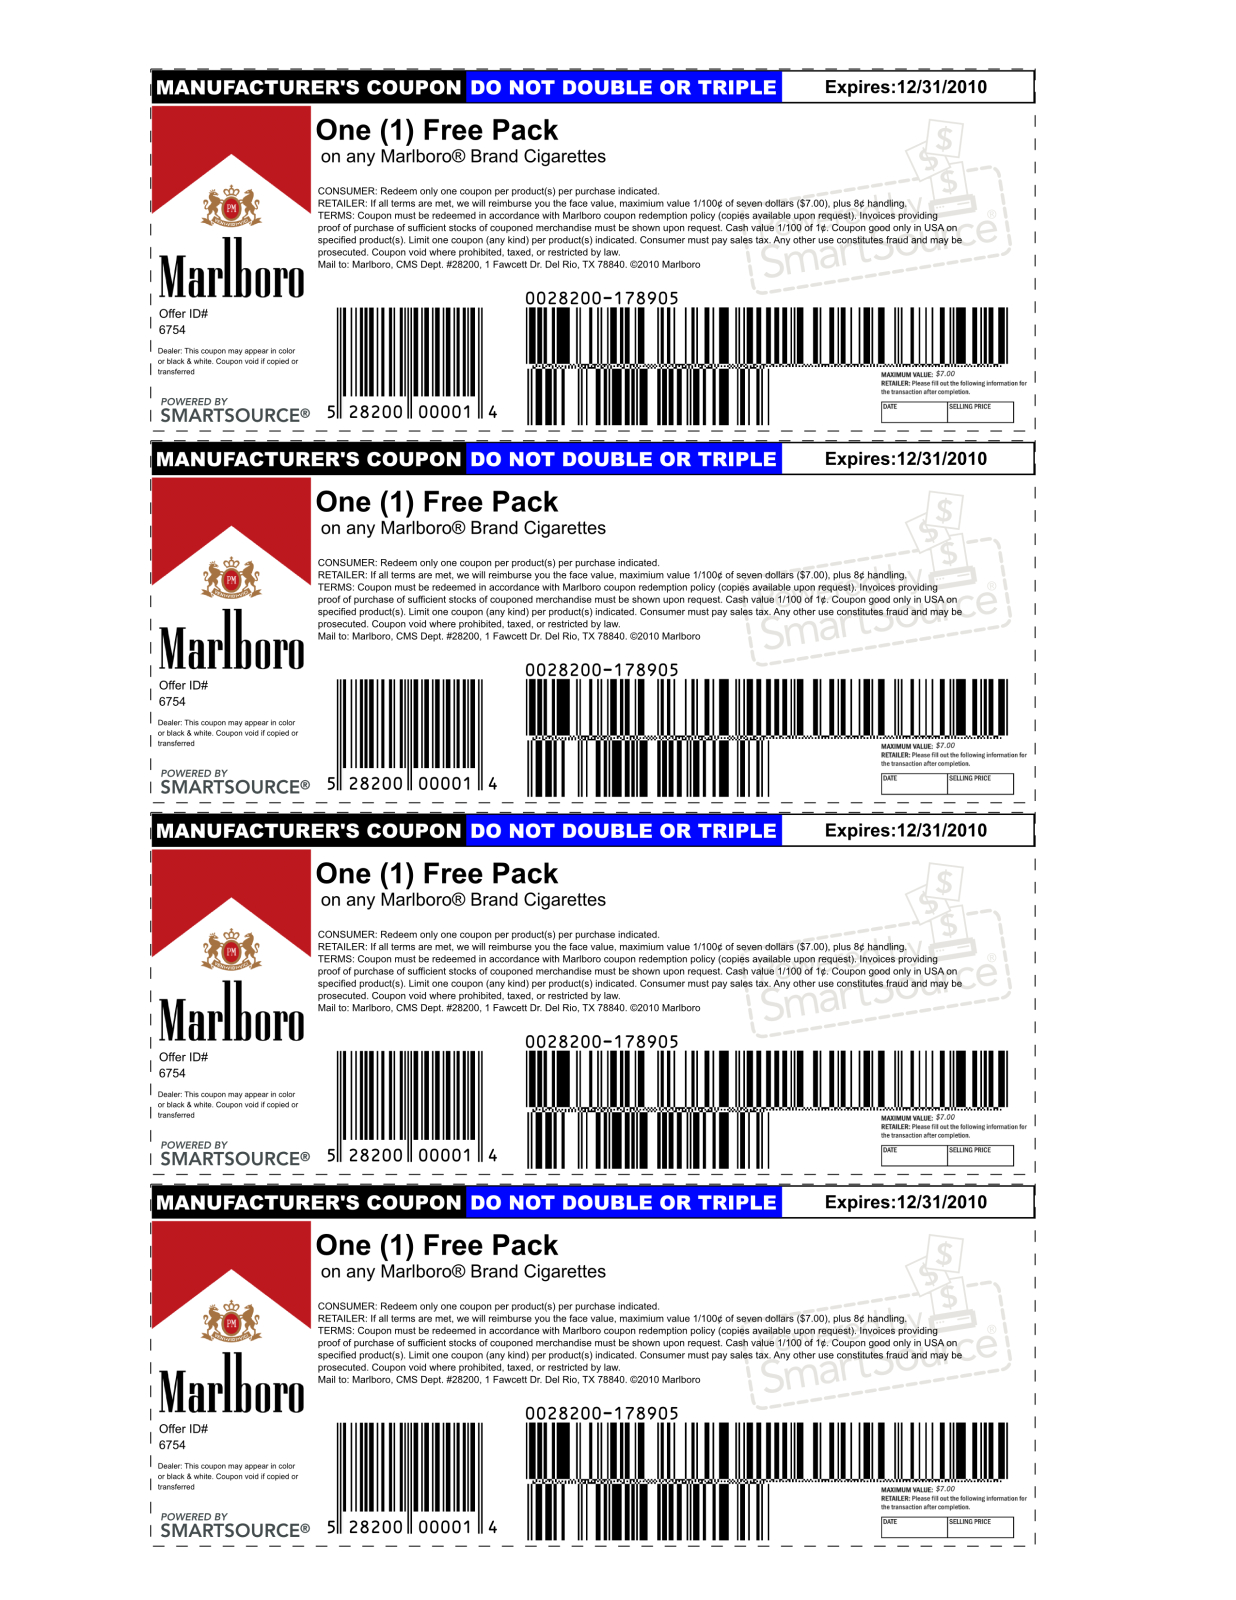 Marlboro Coupons Printable 2013 | Is Using A Possibly Fake Coupon - Free Printable Coupons Without Coupon Printer